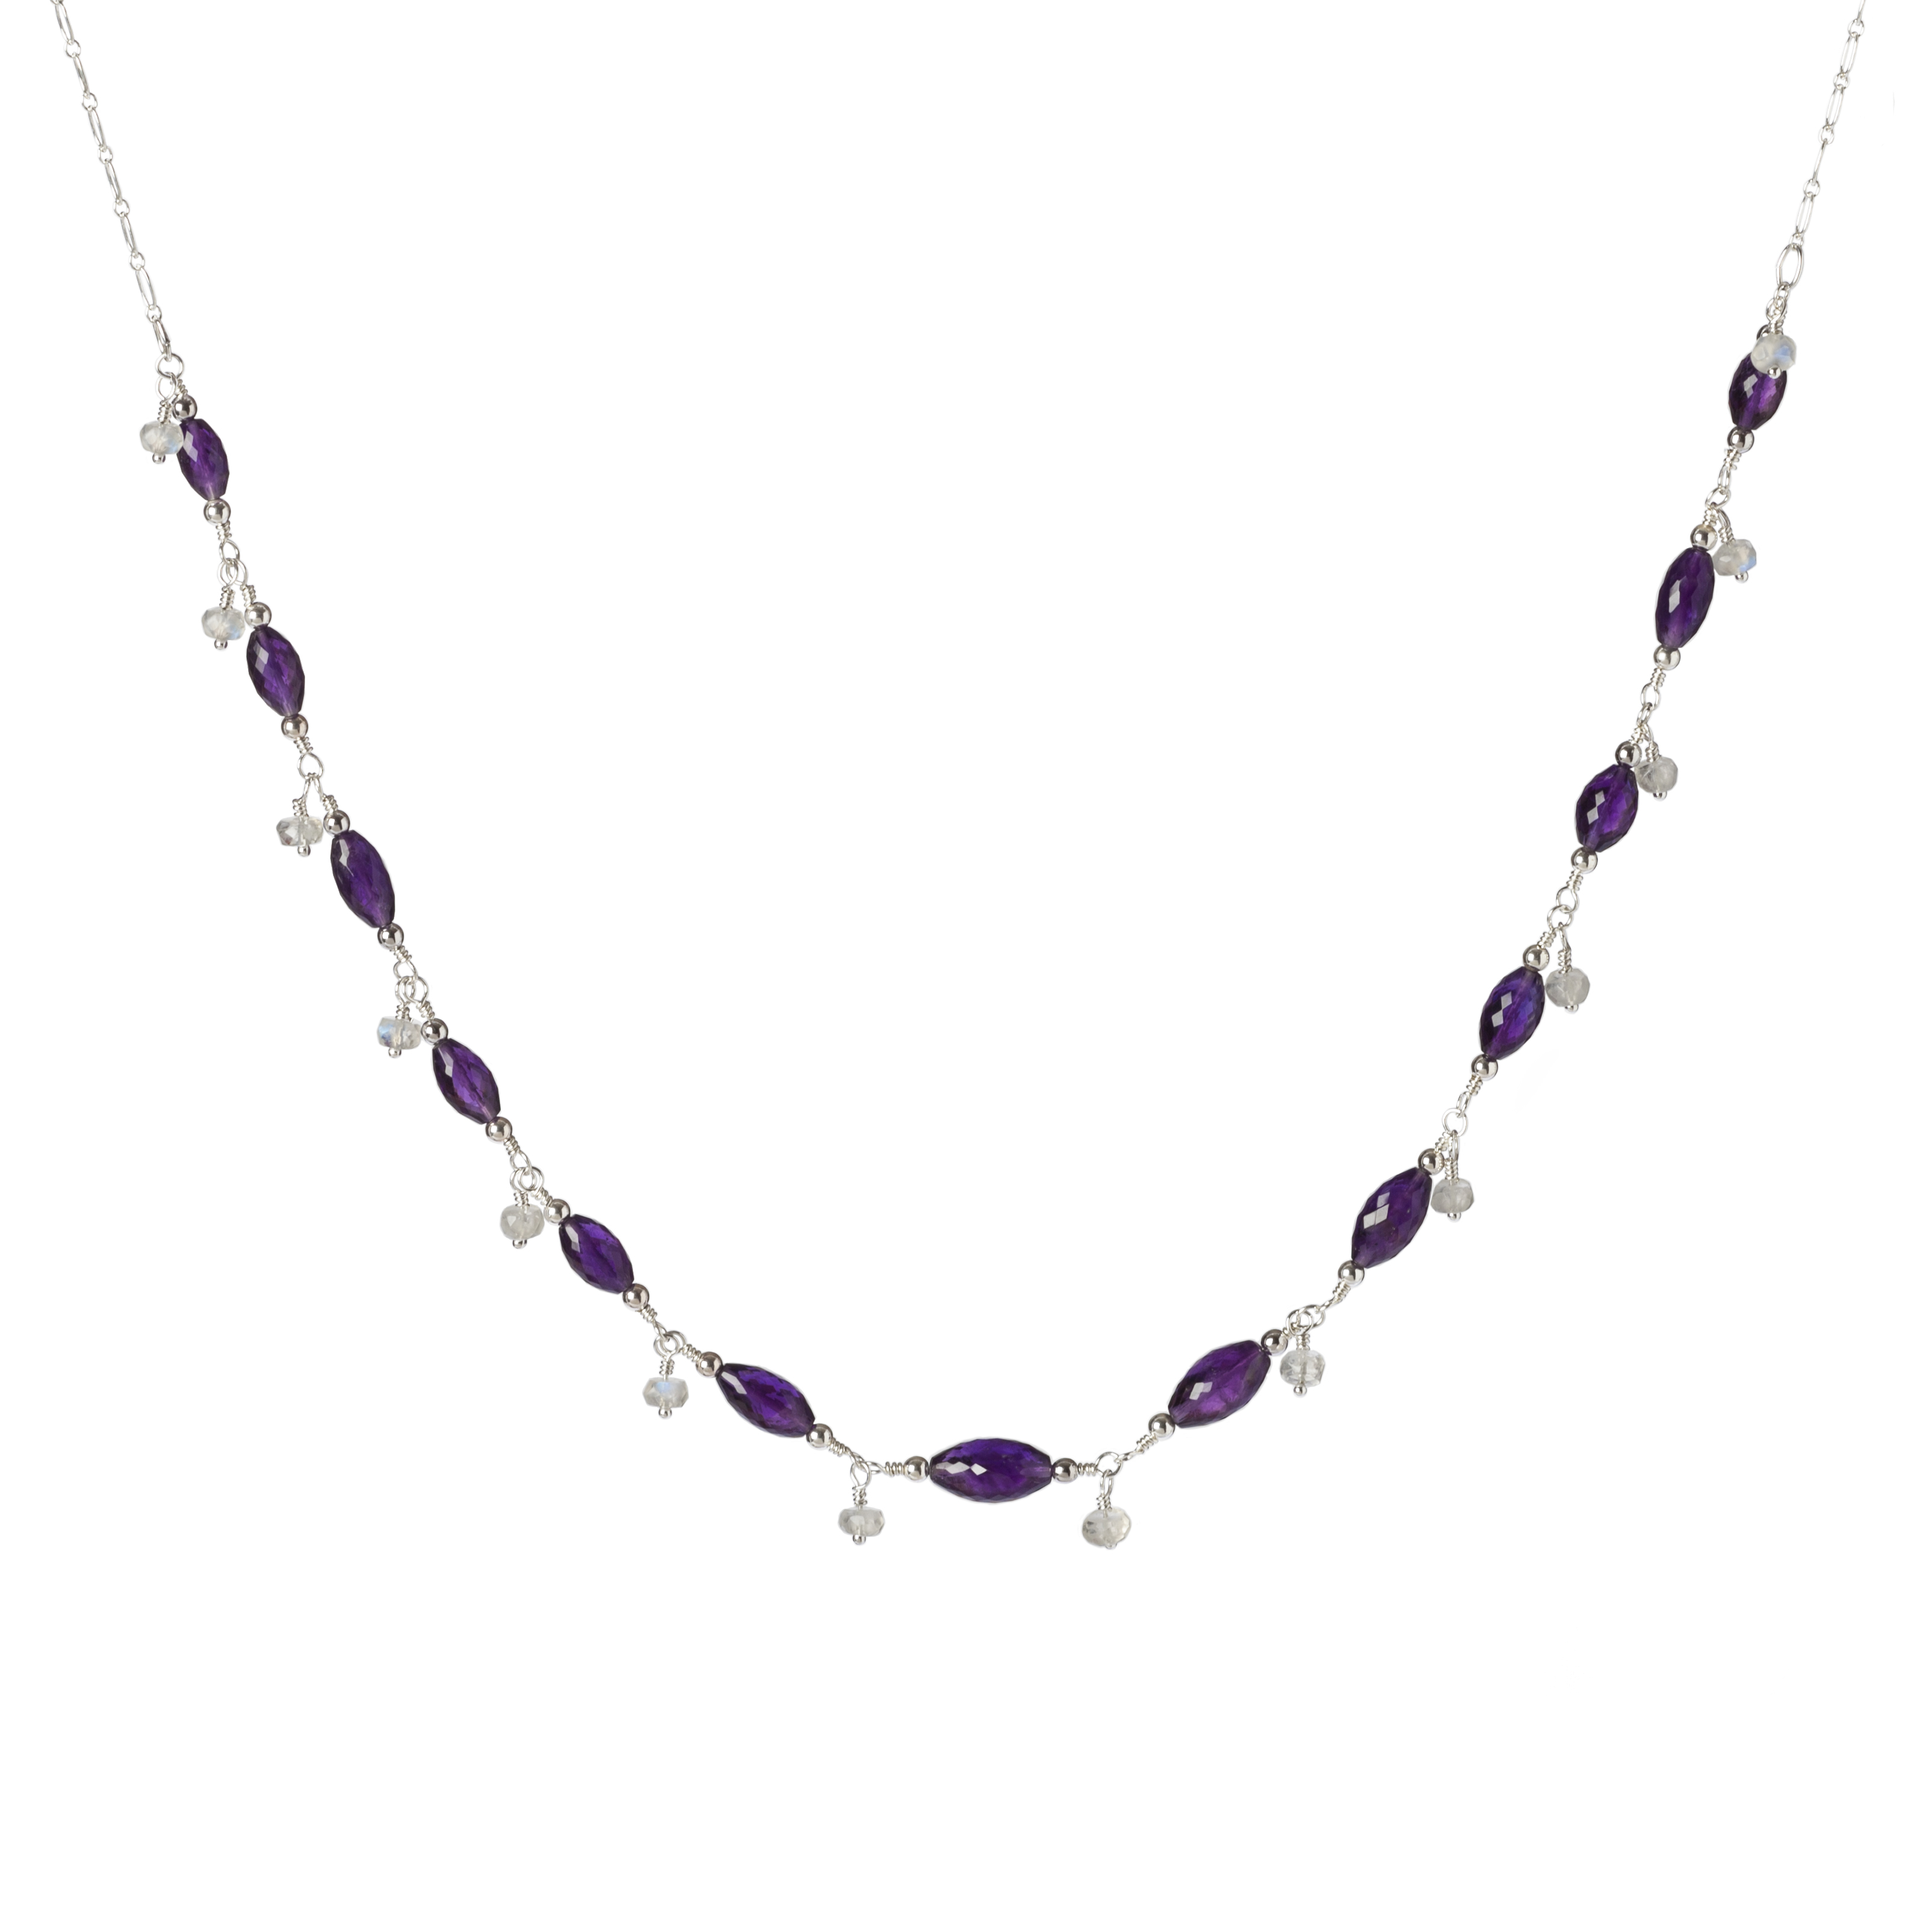 Amethyst Sterling Silver Necklace with Moonstone Drops